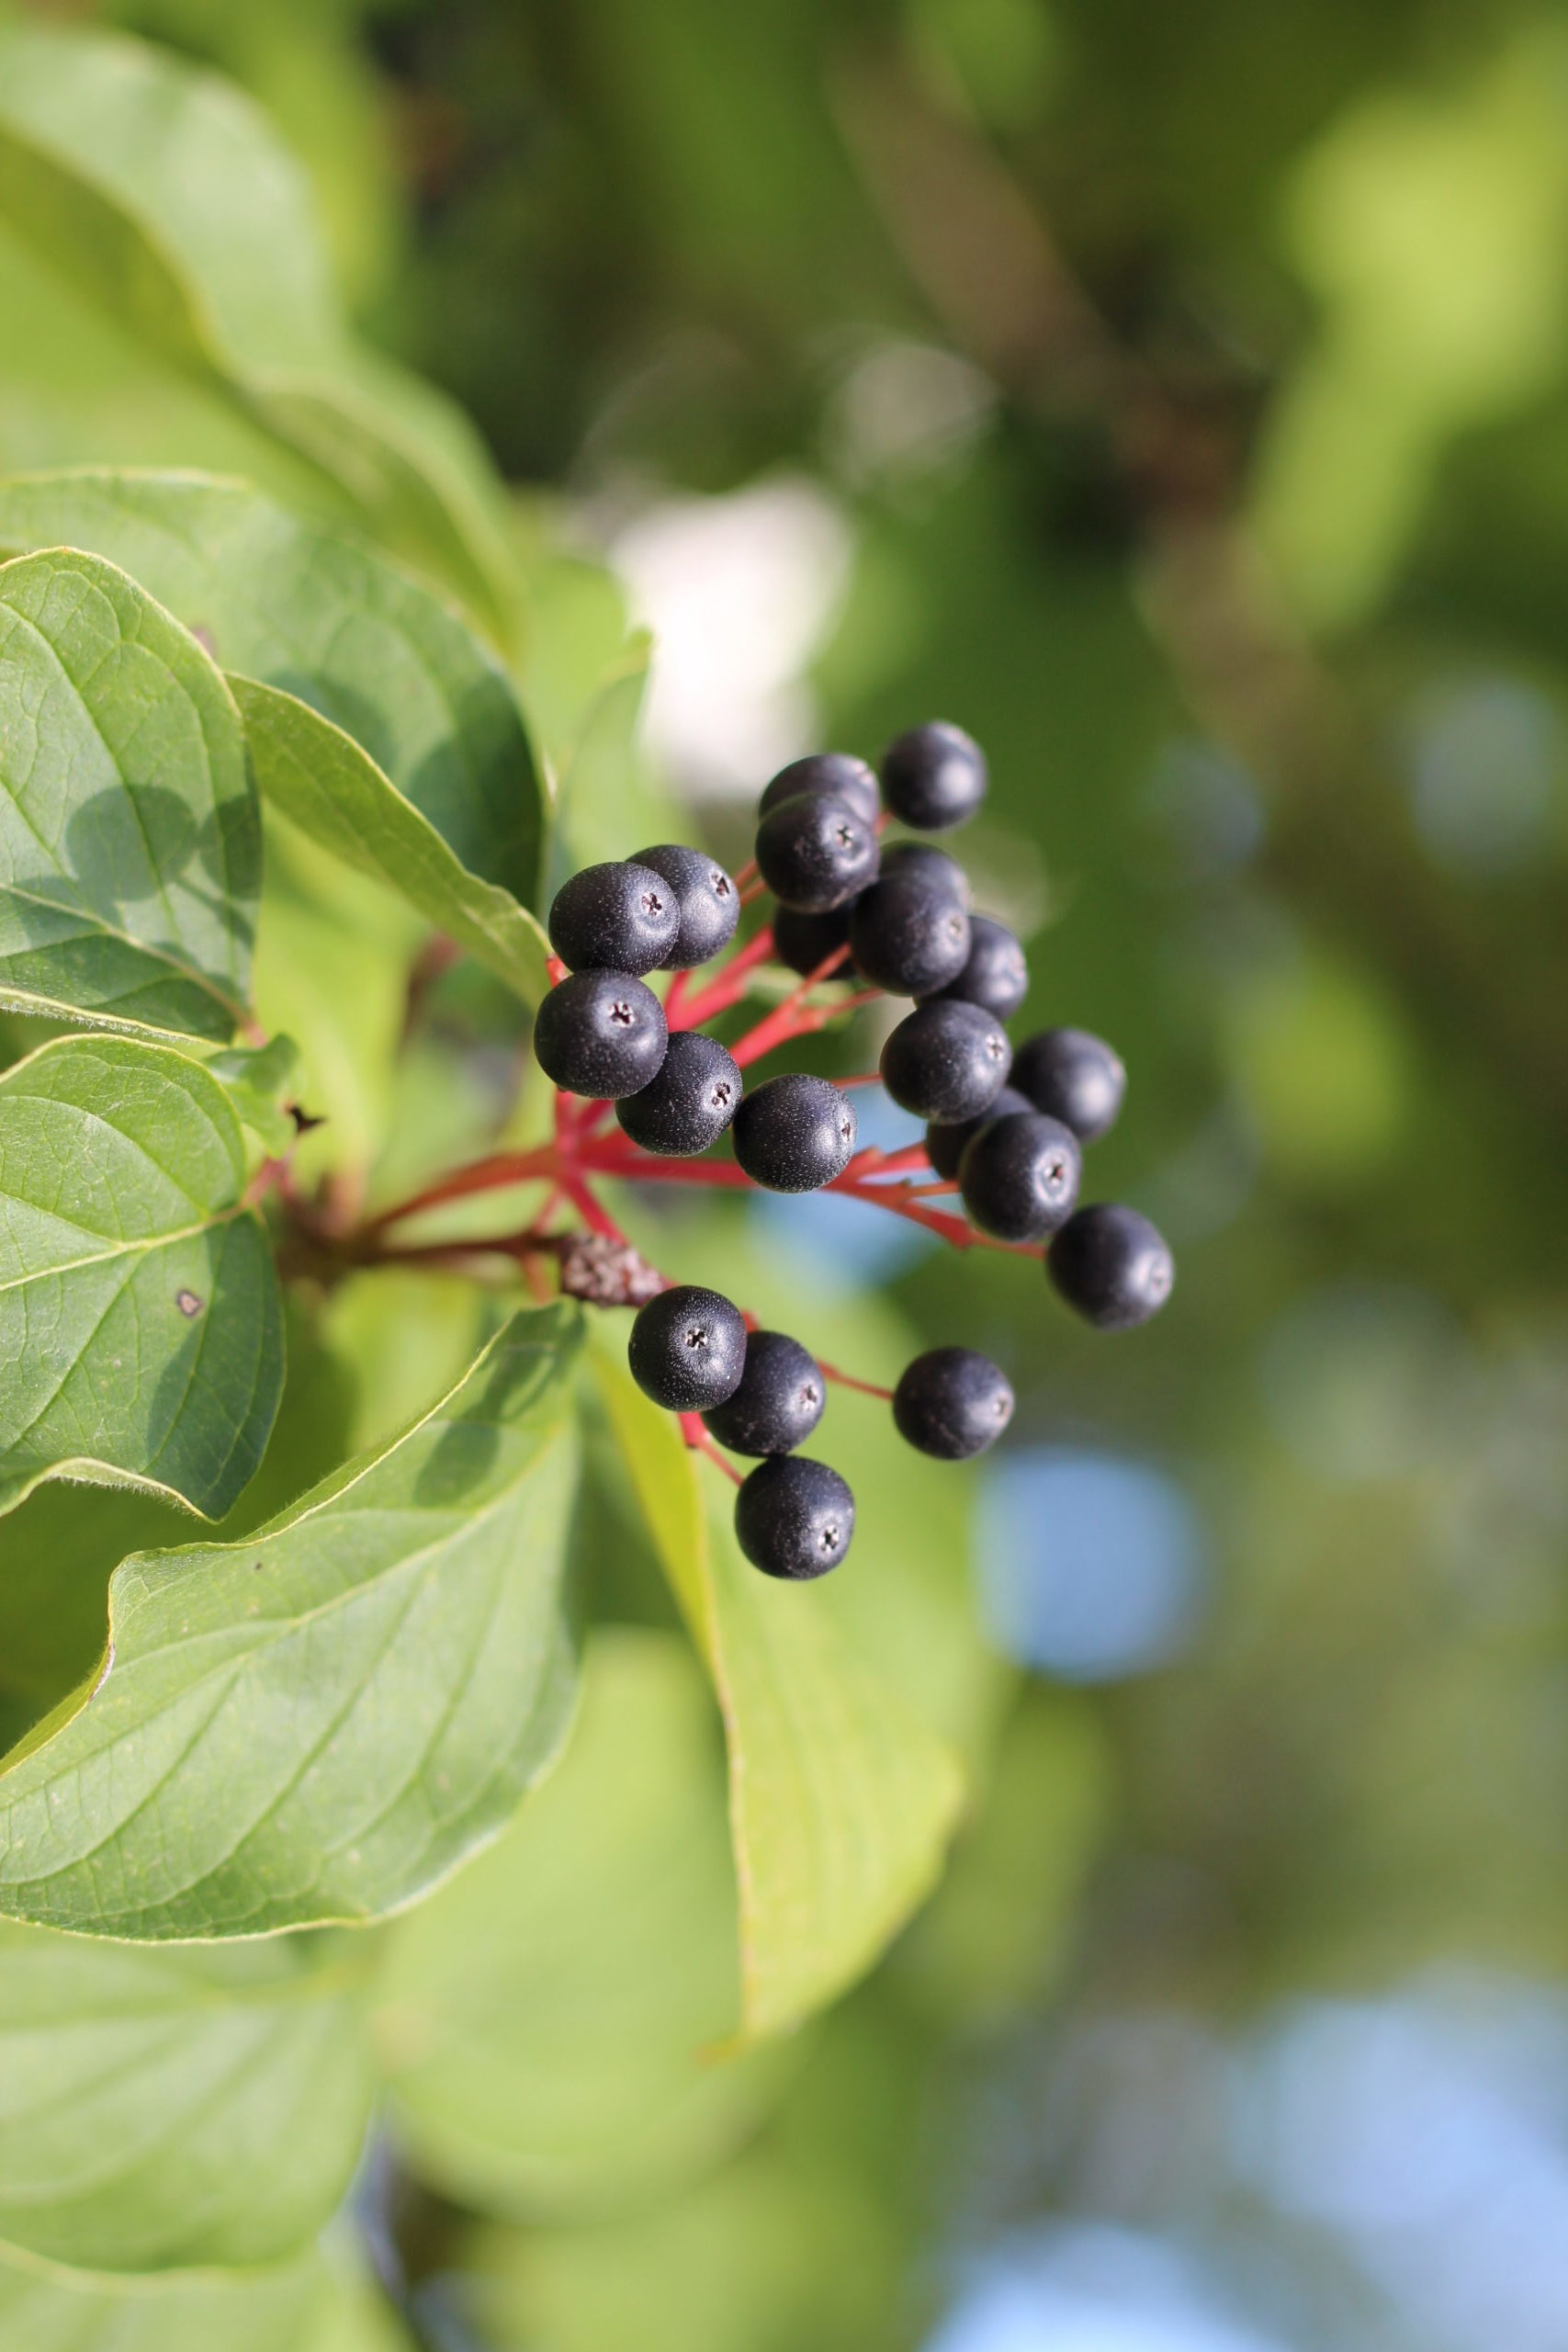 A closeup of a group of small dark berries attached to a plant